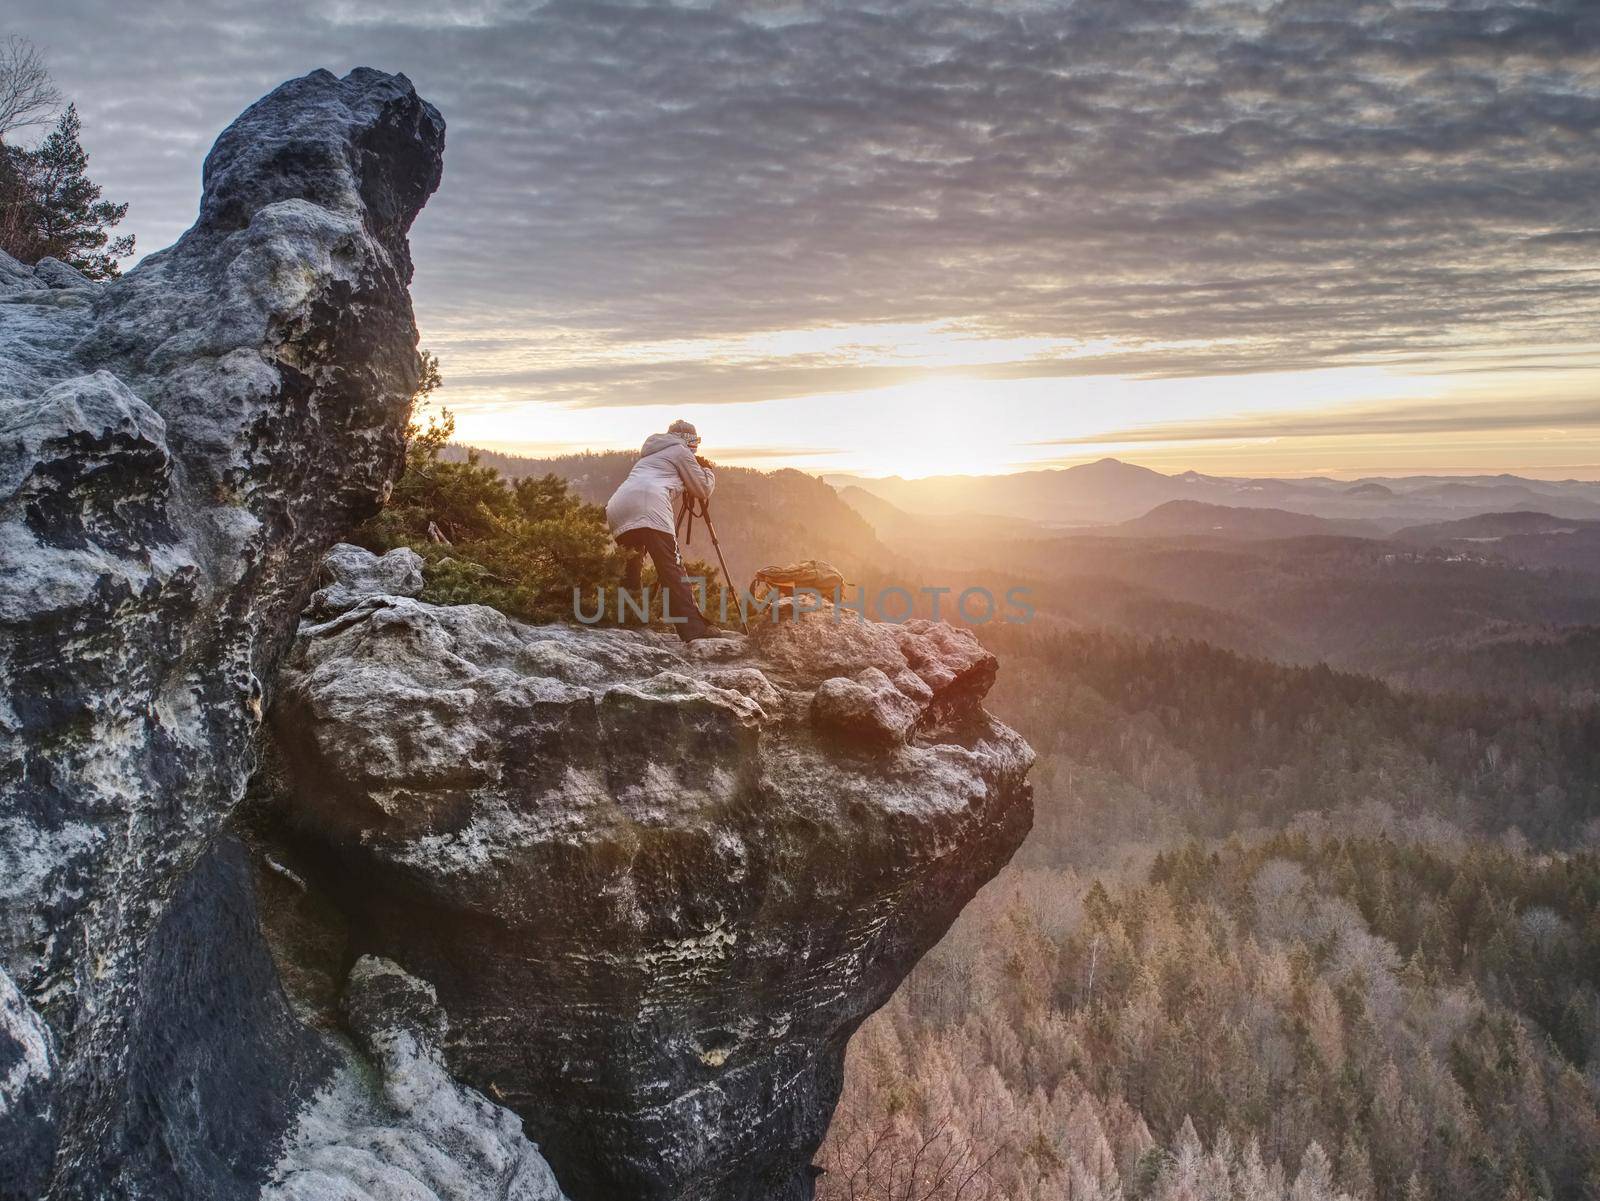 Woman photographer works. Professional artist takes photos with mirror camera and tripod on peak of rock. Dreamy fogy landscape spring orange pink misty sunrise in beautiful valley below.